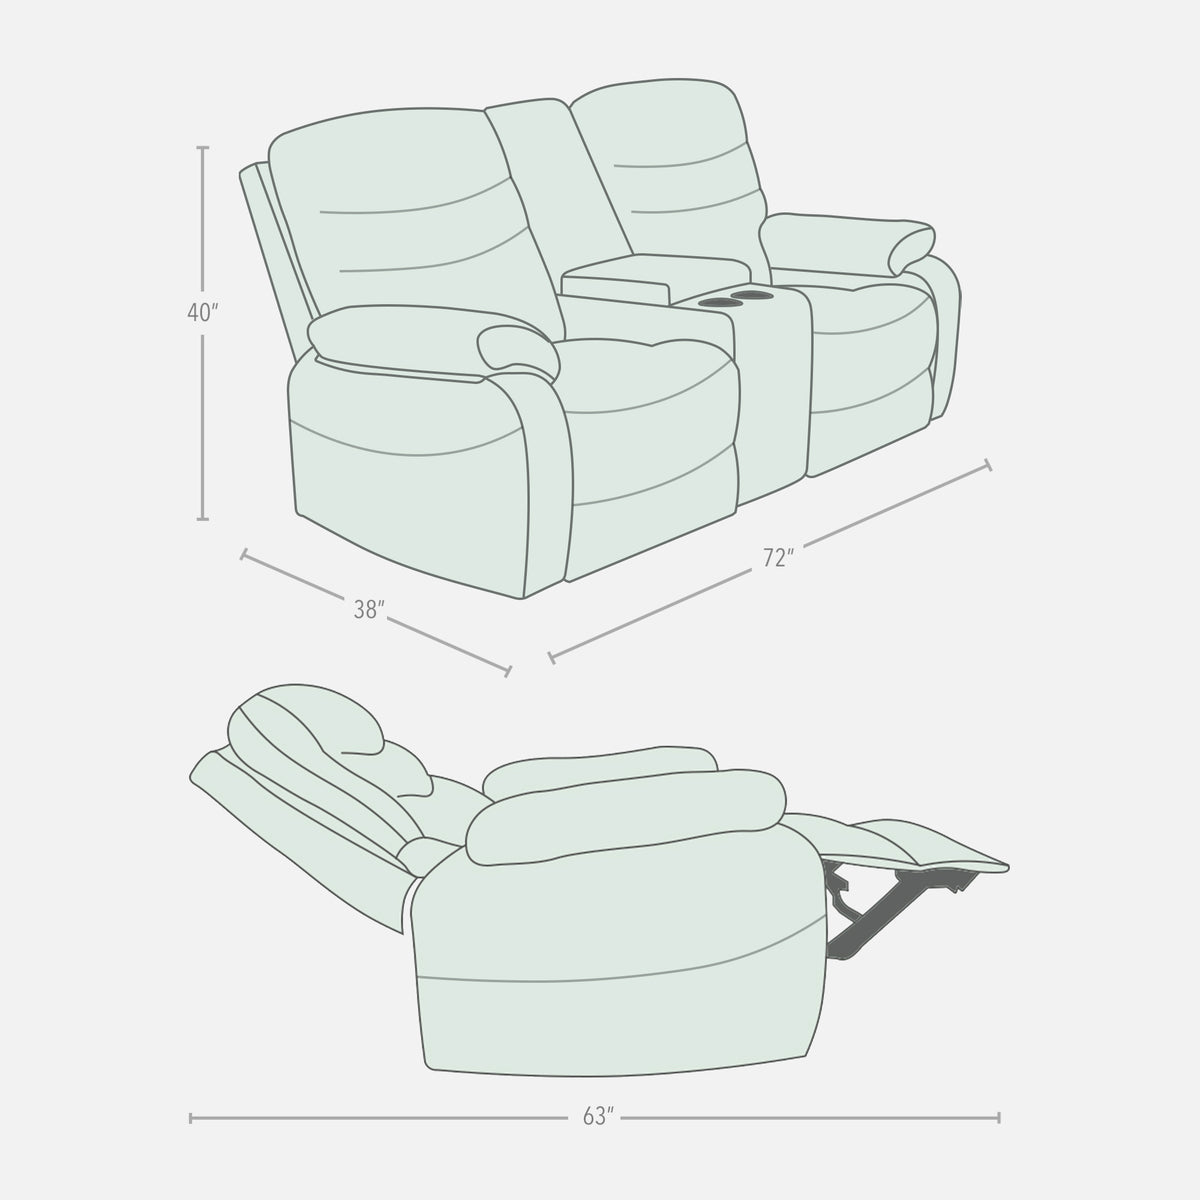 Jamie 2 Seater Recliner with Console